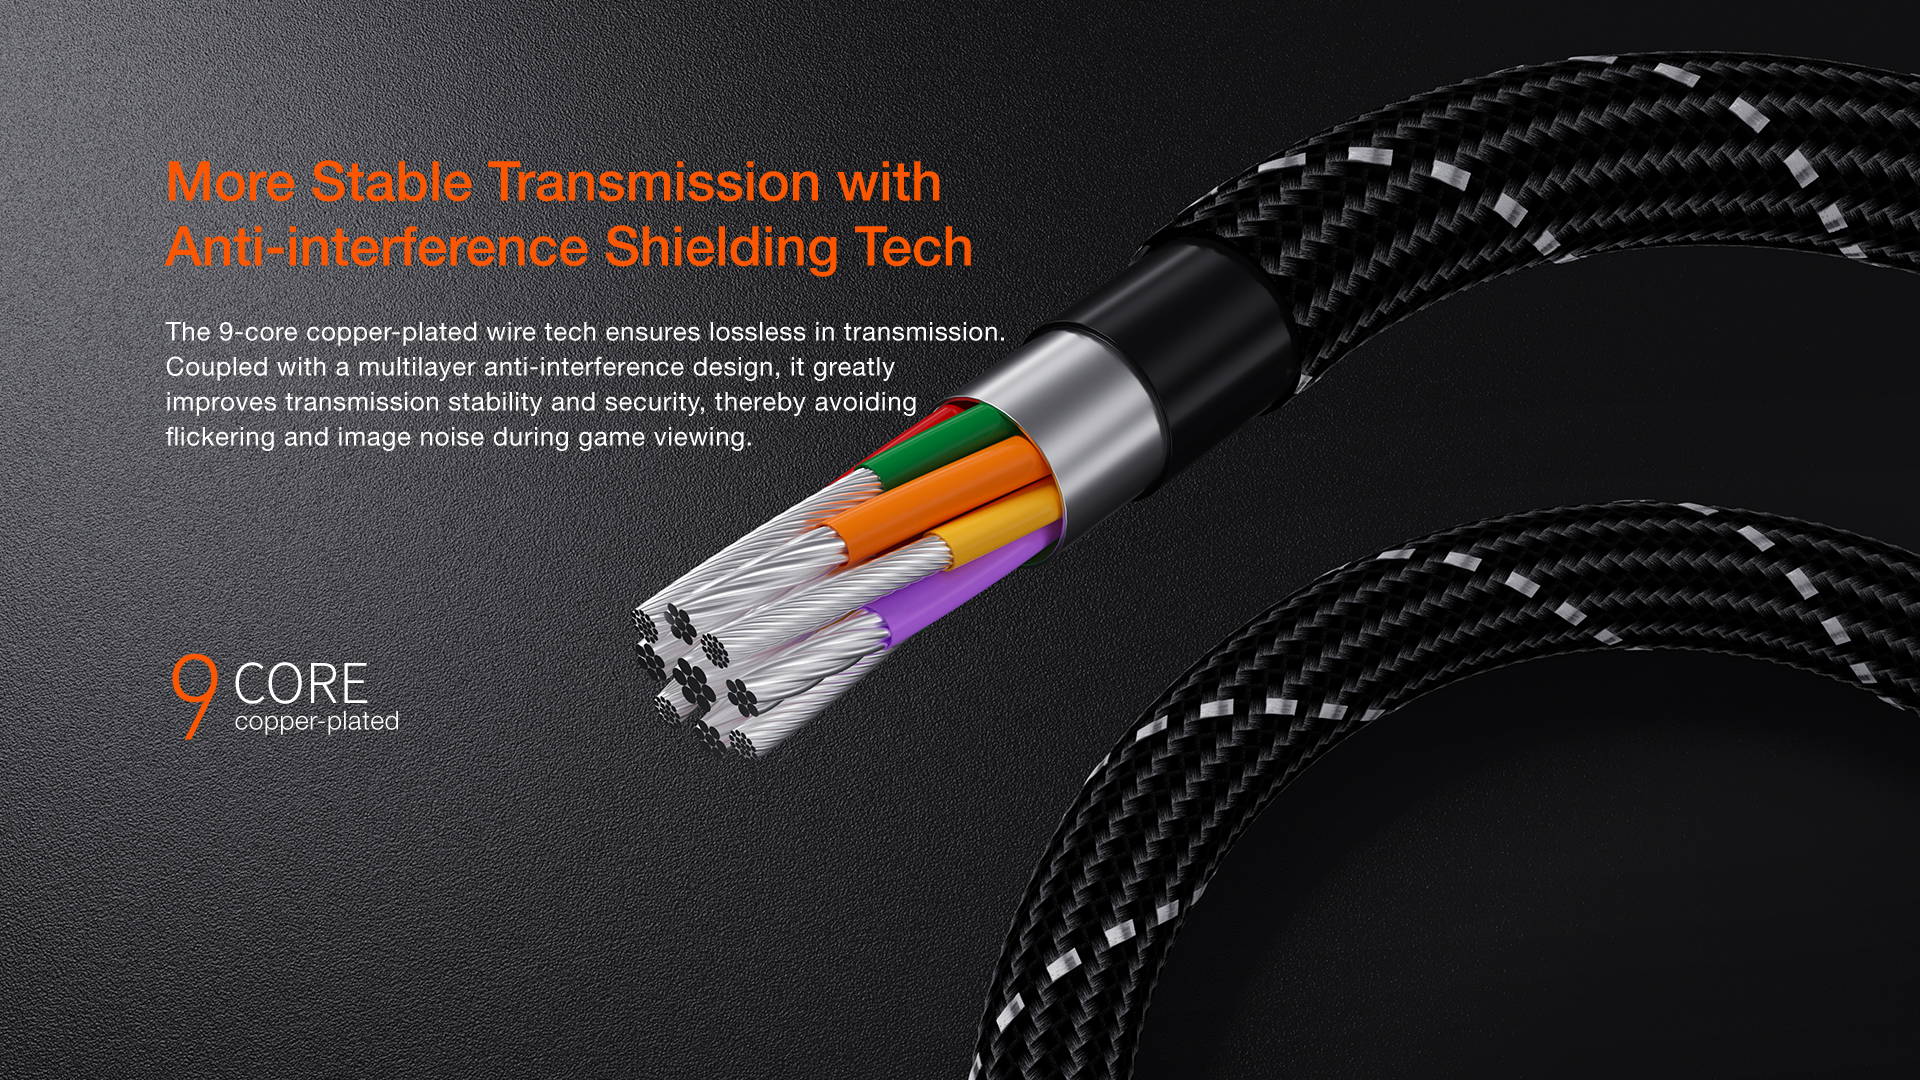 bigbig won usb 3.2 usb c type c link cable 9-core copper-plated wire tech ensures more stable transmission